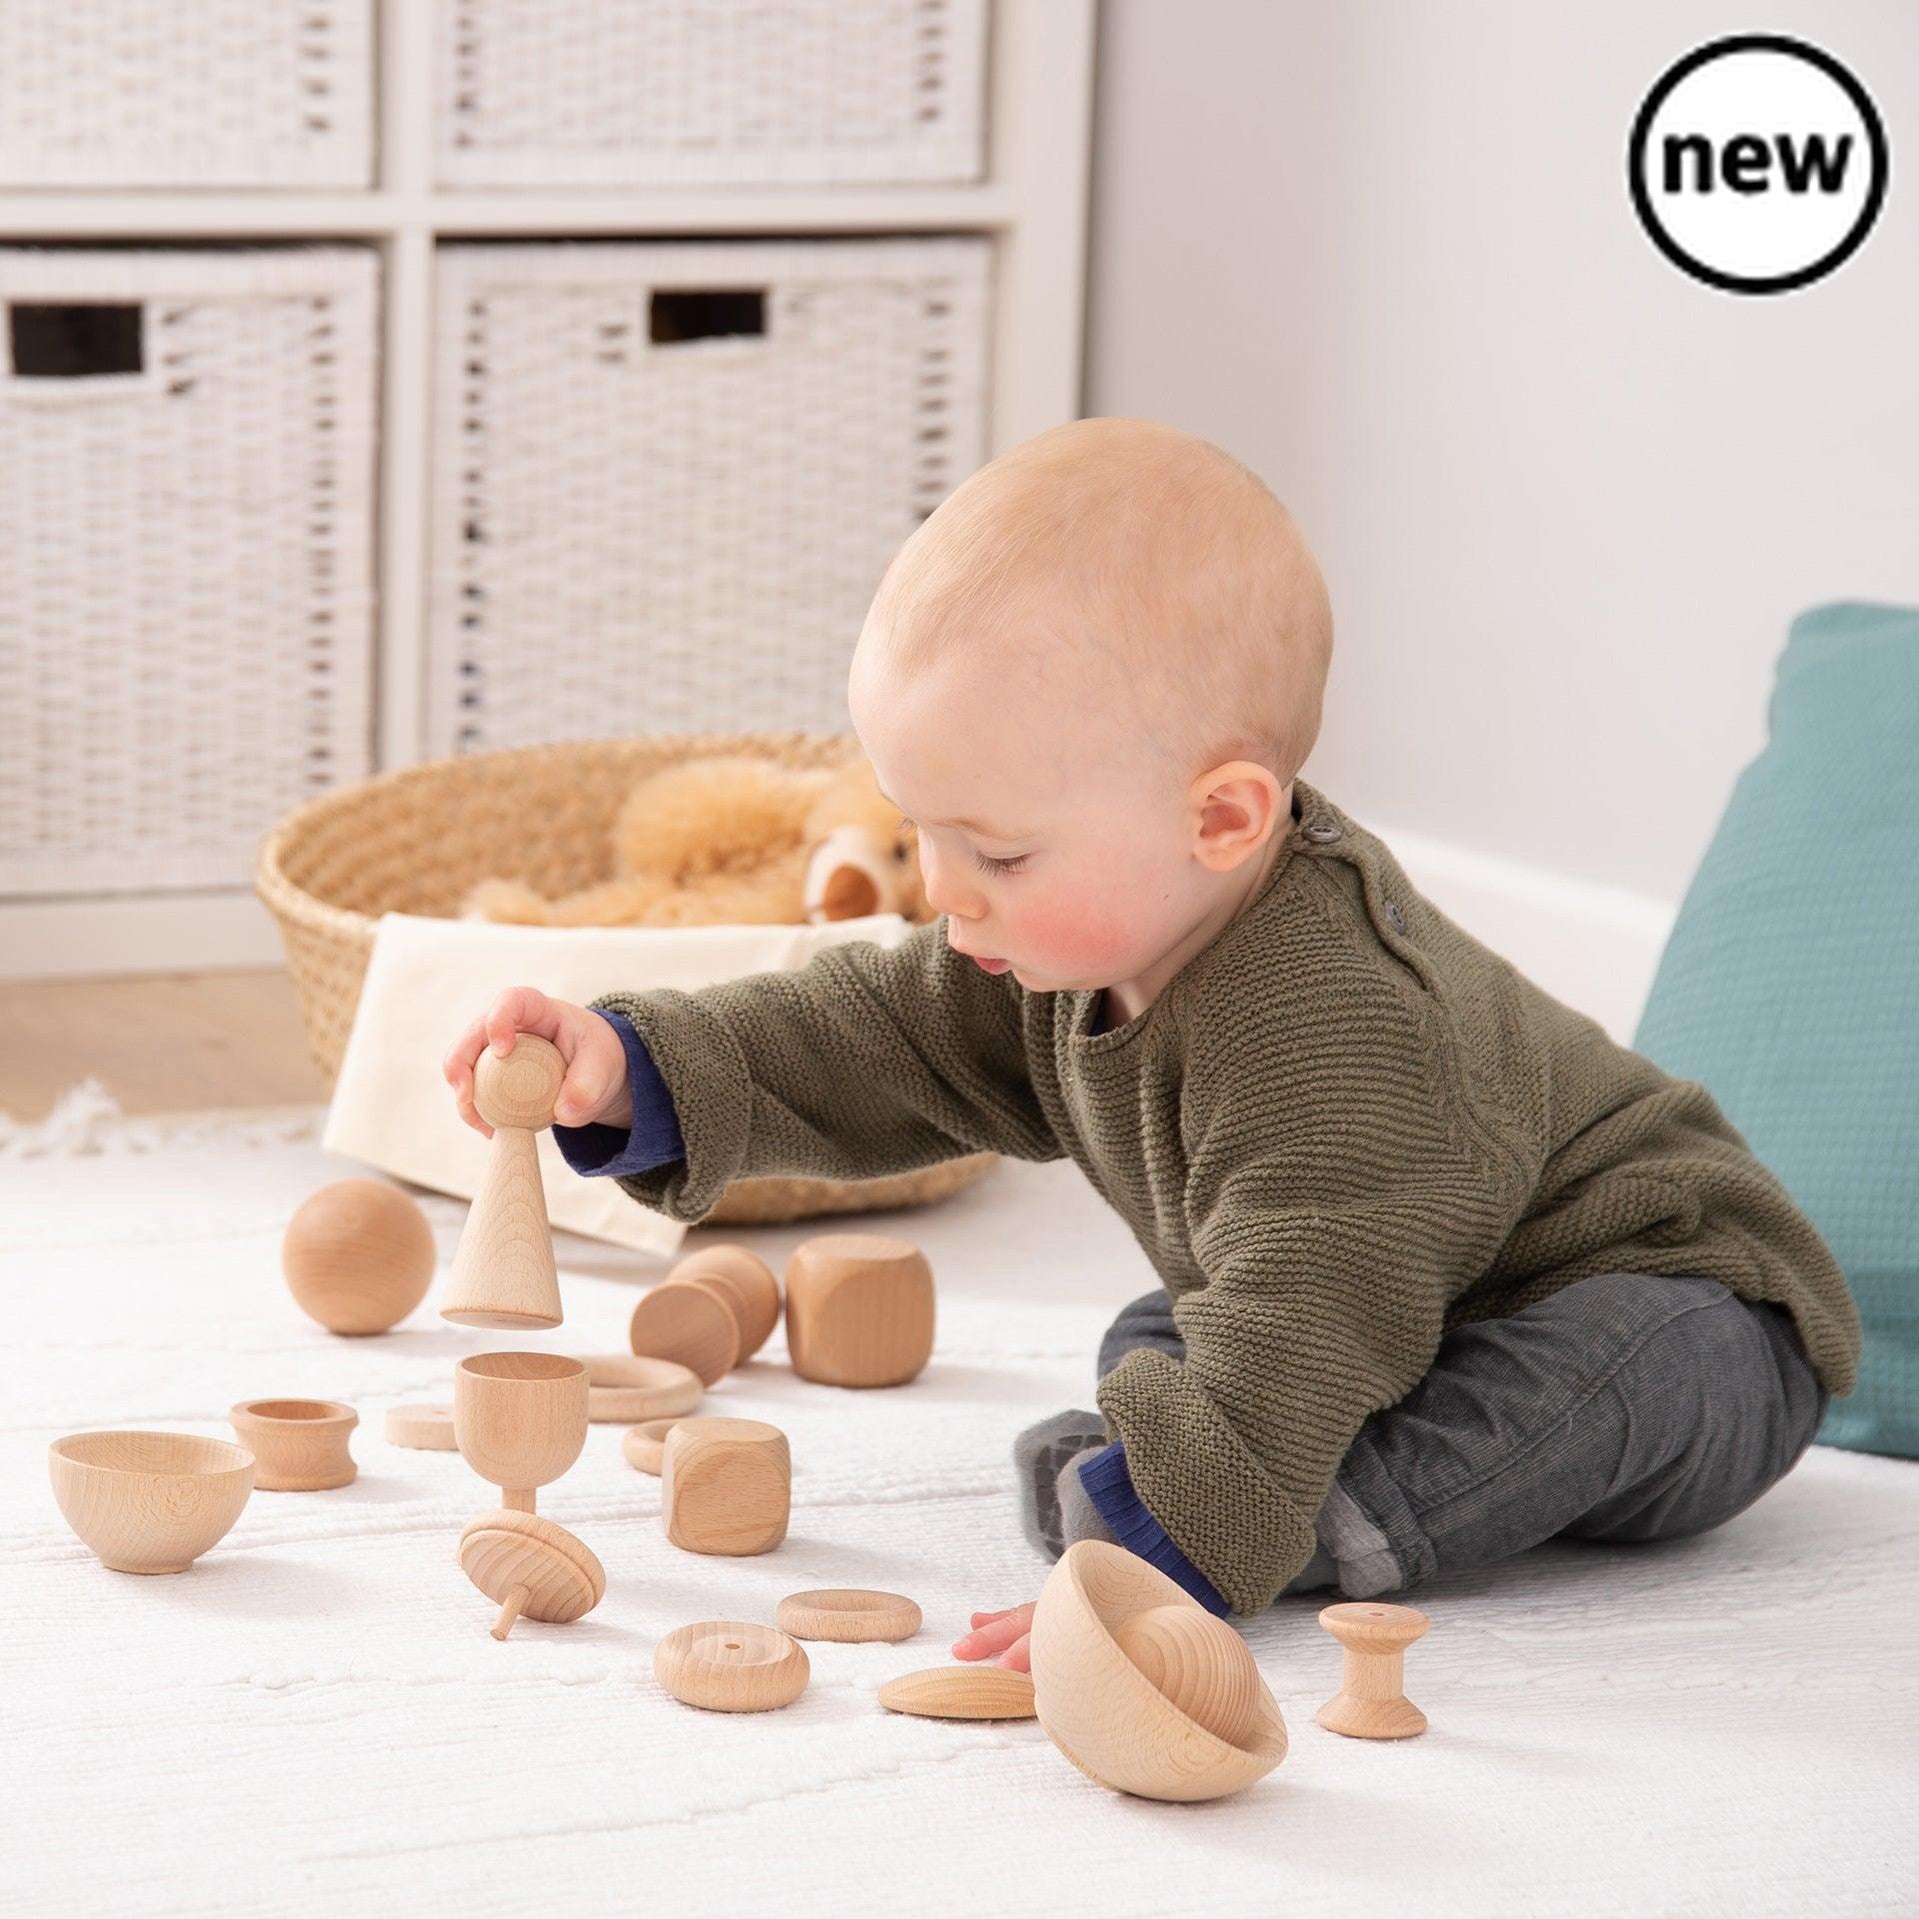 Heuristic Play Basic Set, Enable your child to discover the wonders of learning through play with our TickiT® Heuristic Play Basic Set. The Heuristic Play Basic Set contains a variety of interesting wooden objects that are not typical of the sort of toys they will be used to. These simple and curious items will spark your child's imagination and encourage them to explore ways to incorporate them into imaginative play and learn about the world around them. Quite simply, the Heuristic Play Basic Set resources